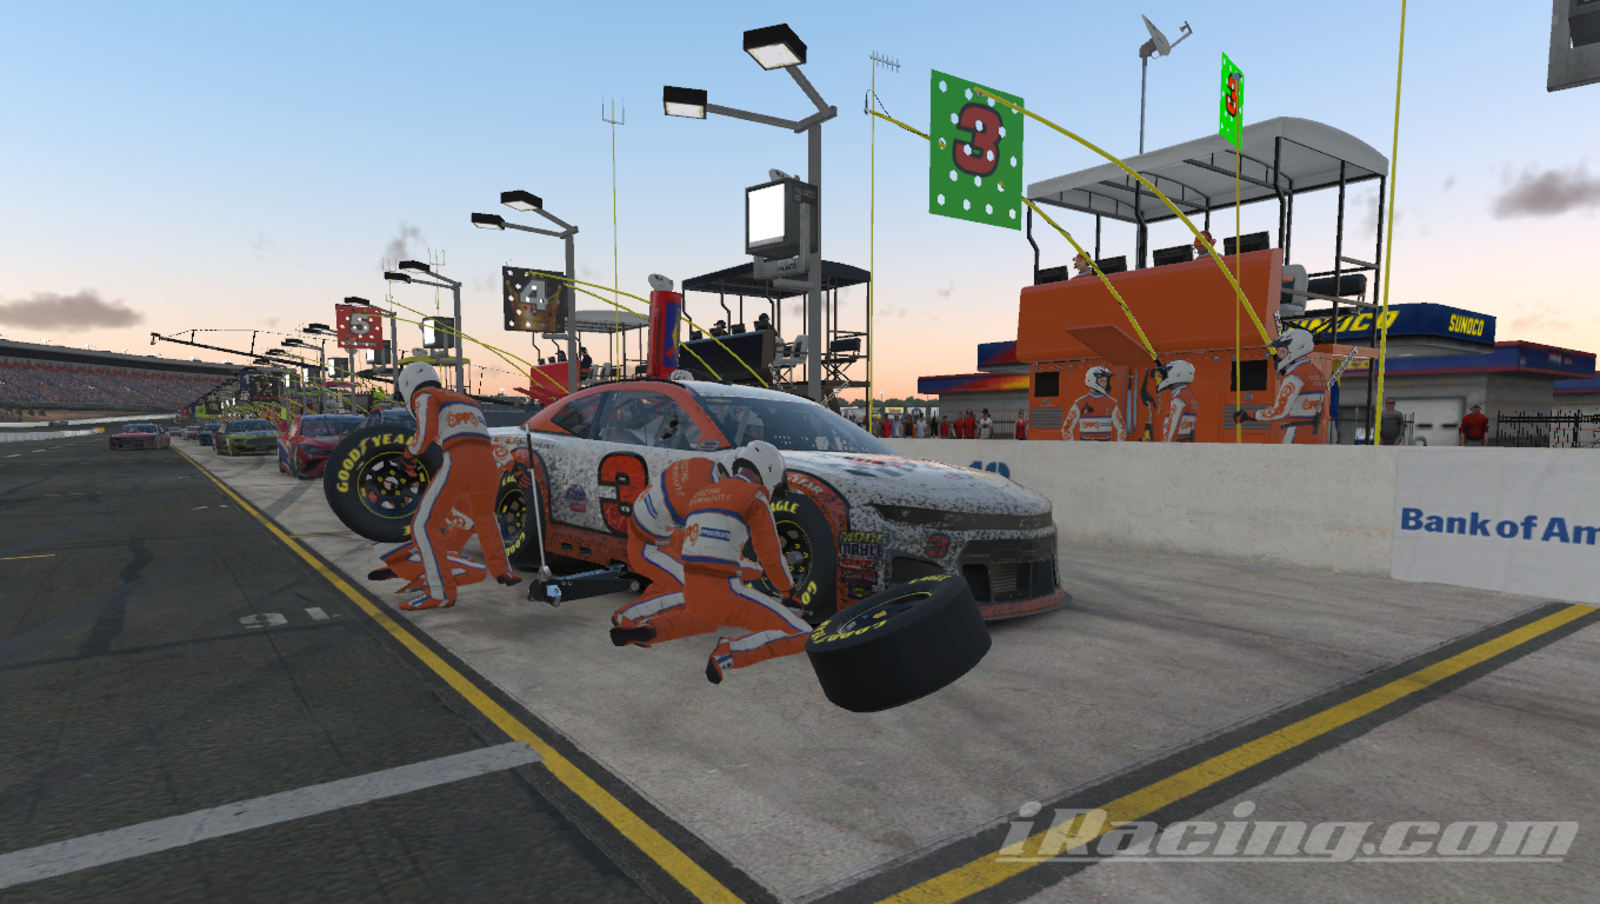 The Team Oppo crew is on point with another perfectly executed pit stop.